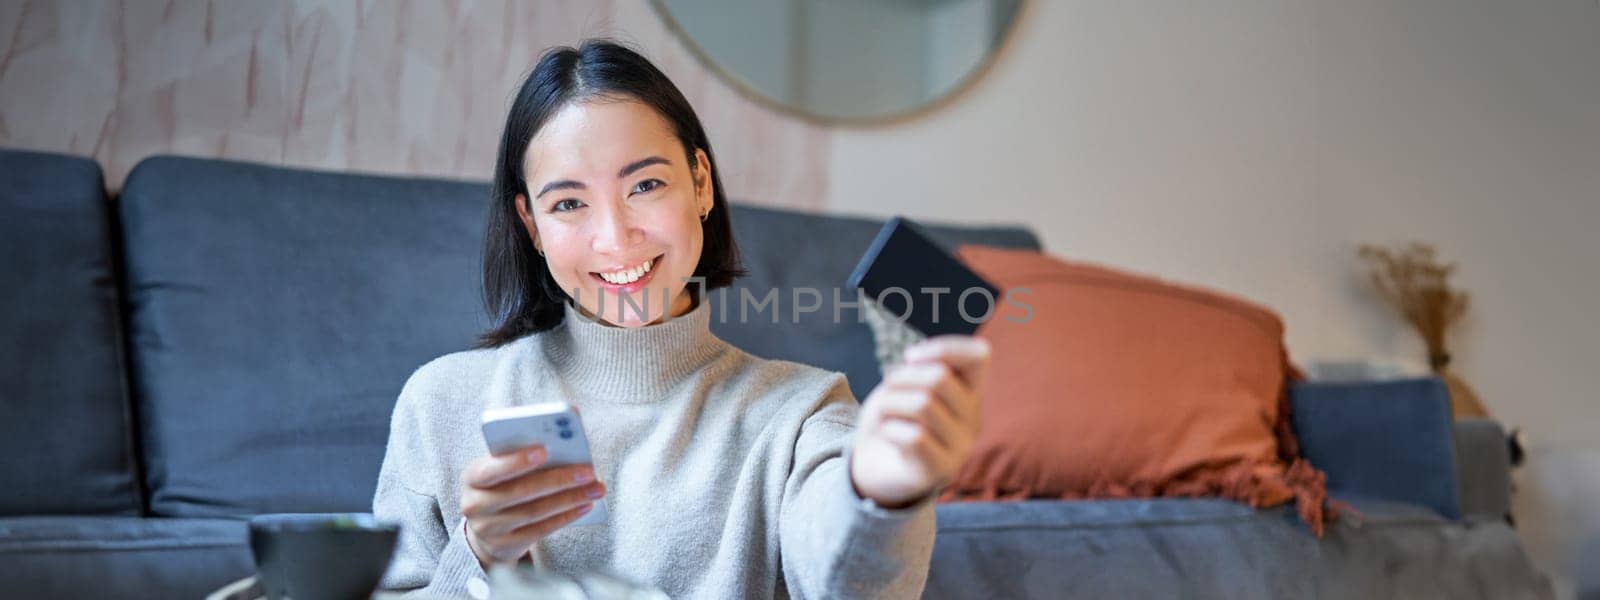 Smiling cute asian woman using credit card and smartphone, paying bills online, holding mobile phone, looking at camera.